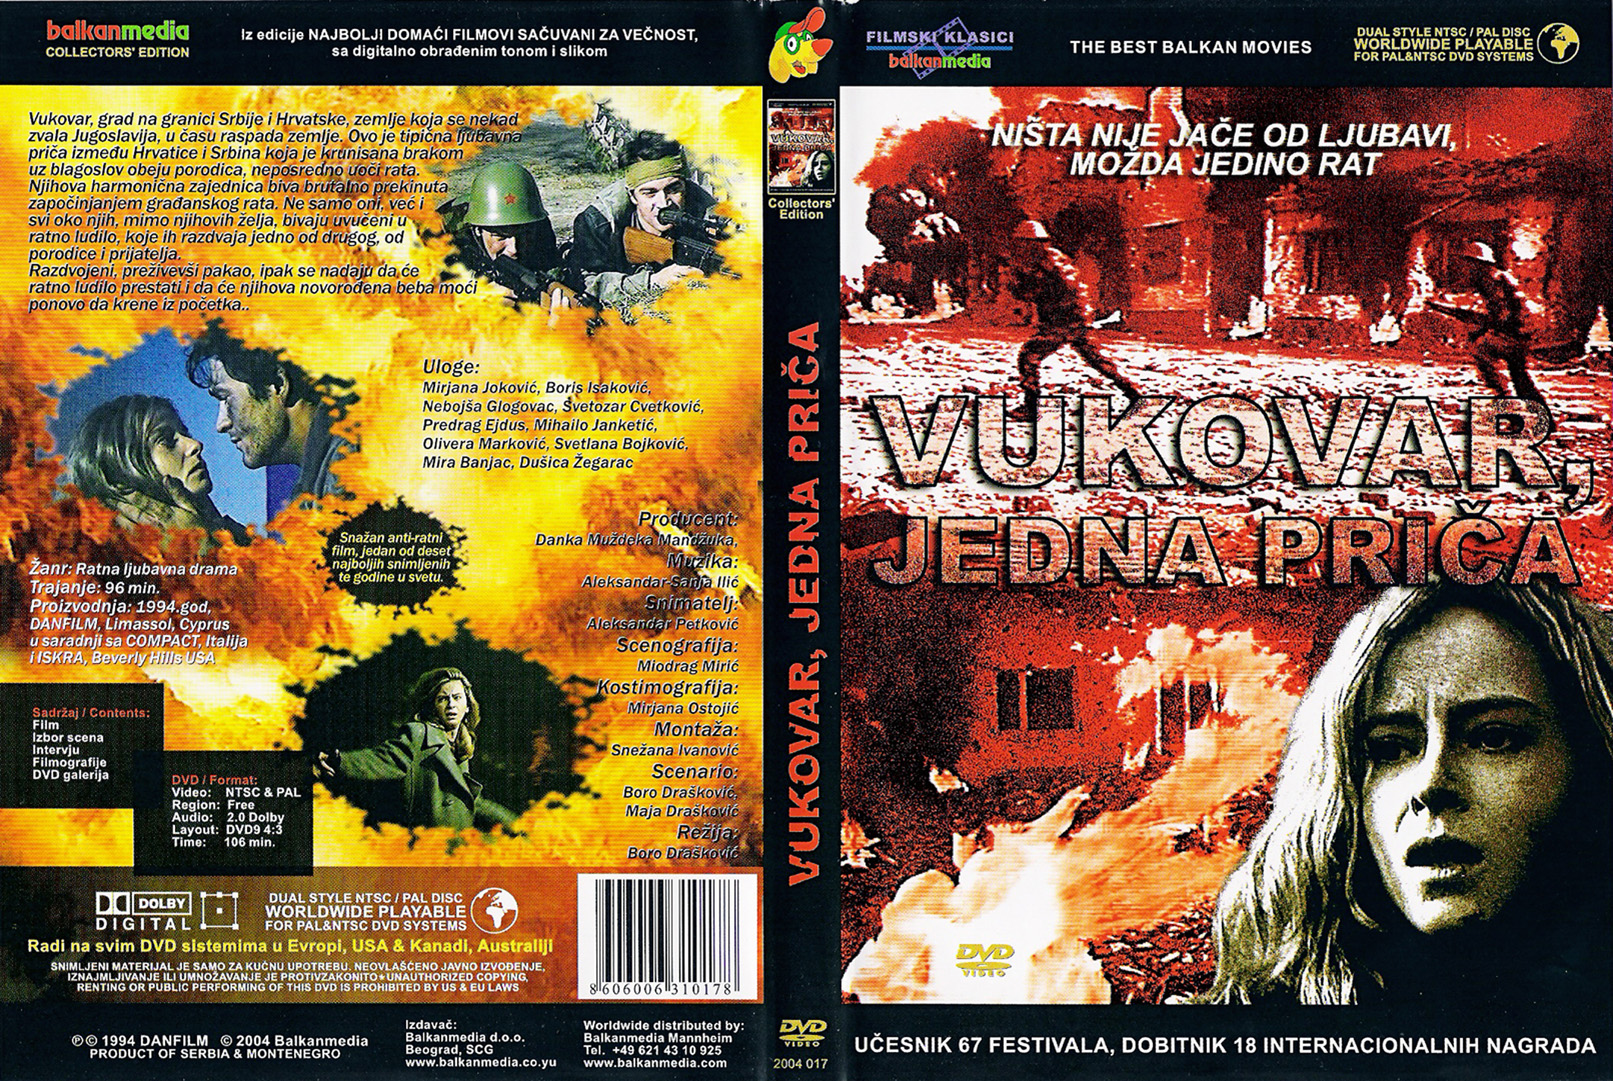 Click to view full size image -  DVD Cover - V - DVD - VUKOVAR JEDNA PRICA - DVD - VUKOVAR JEDNA PRICA.jpg